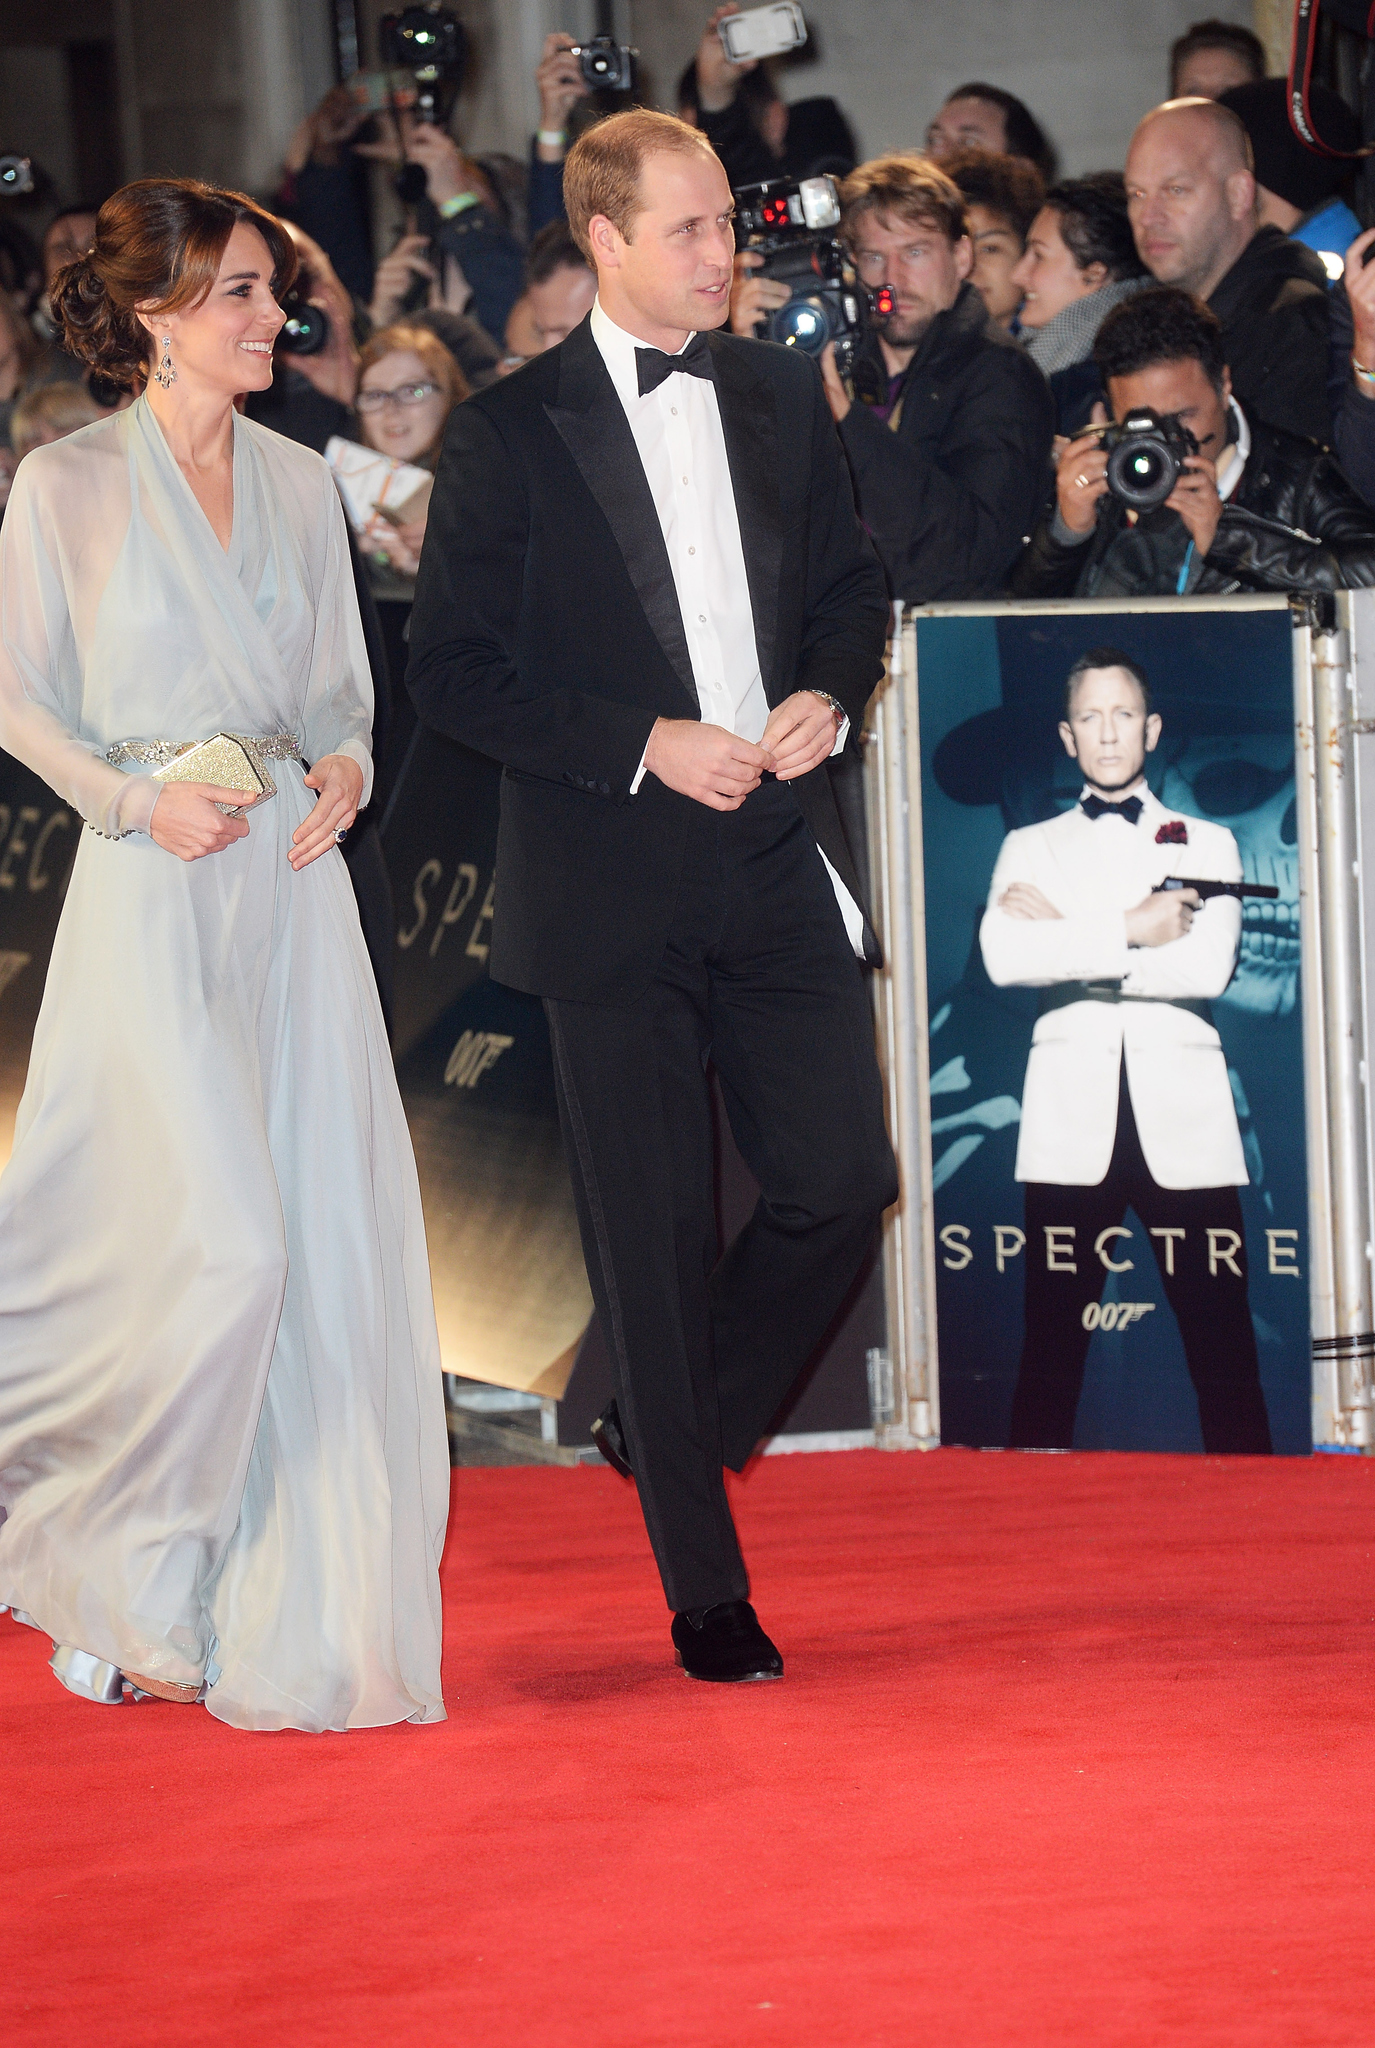 Prince William Windsor and Catherine Duchess of Cambridge at event of Spectre (2015)